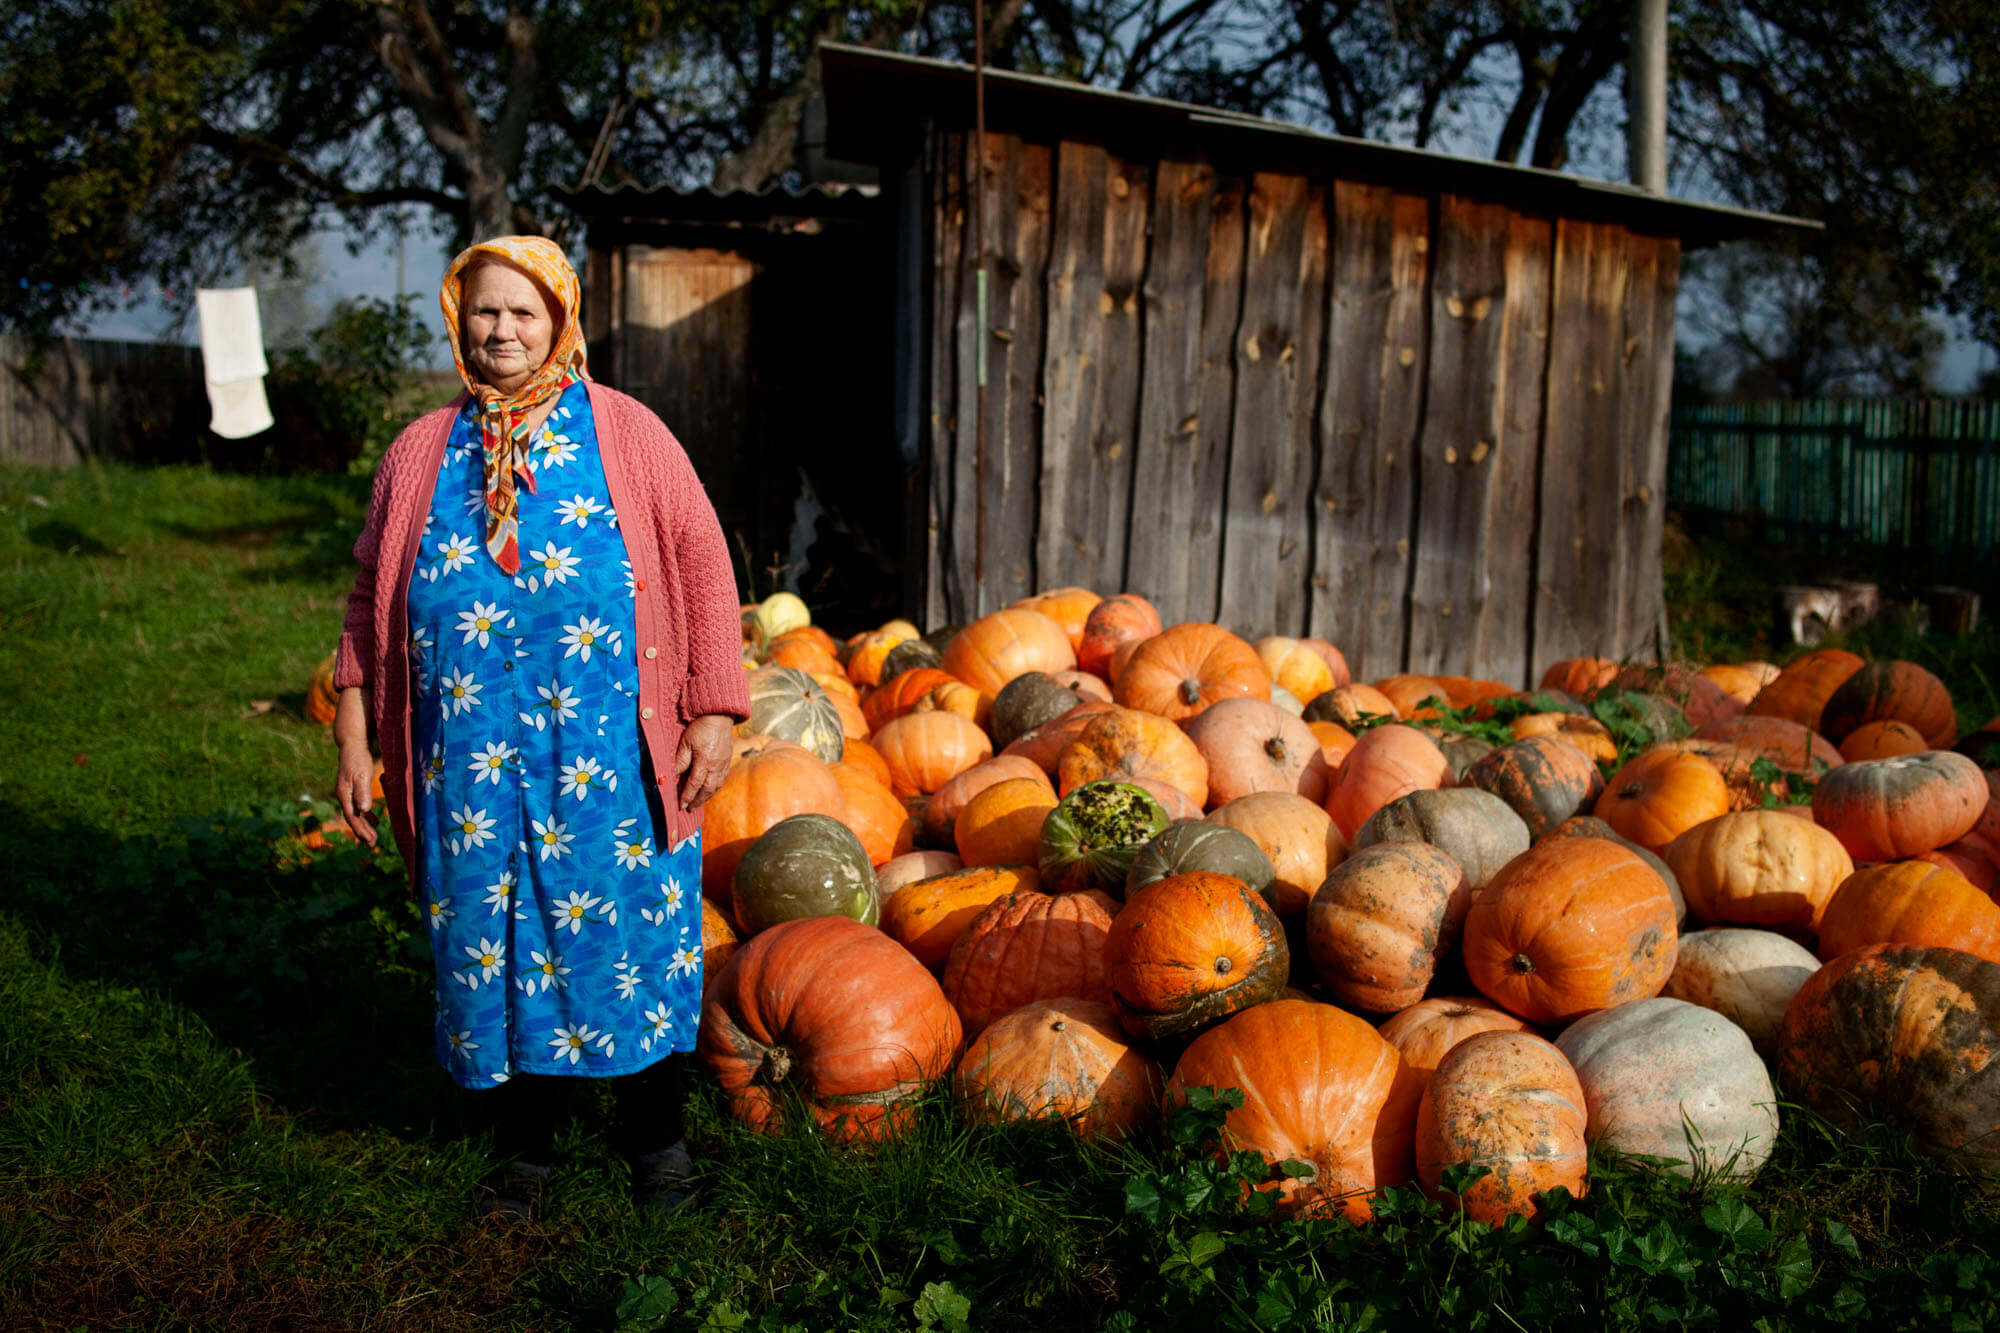 A woman wearing a blue dress, pink cardigan, and orange head scarf stands next to a pile of pumpkins. A wooden shed sits in the background.